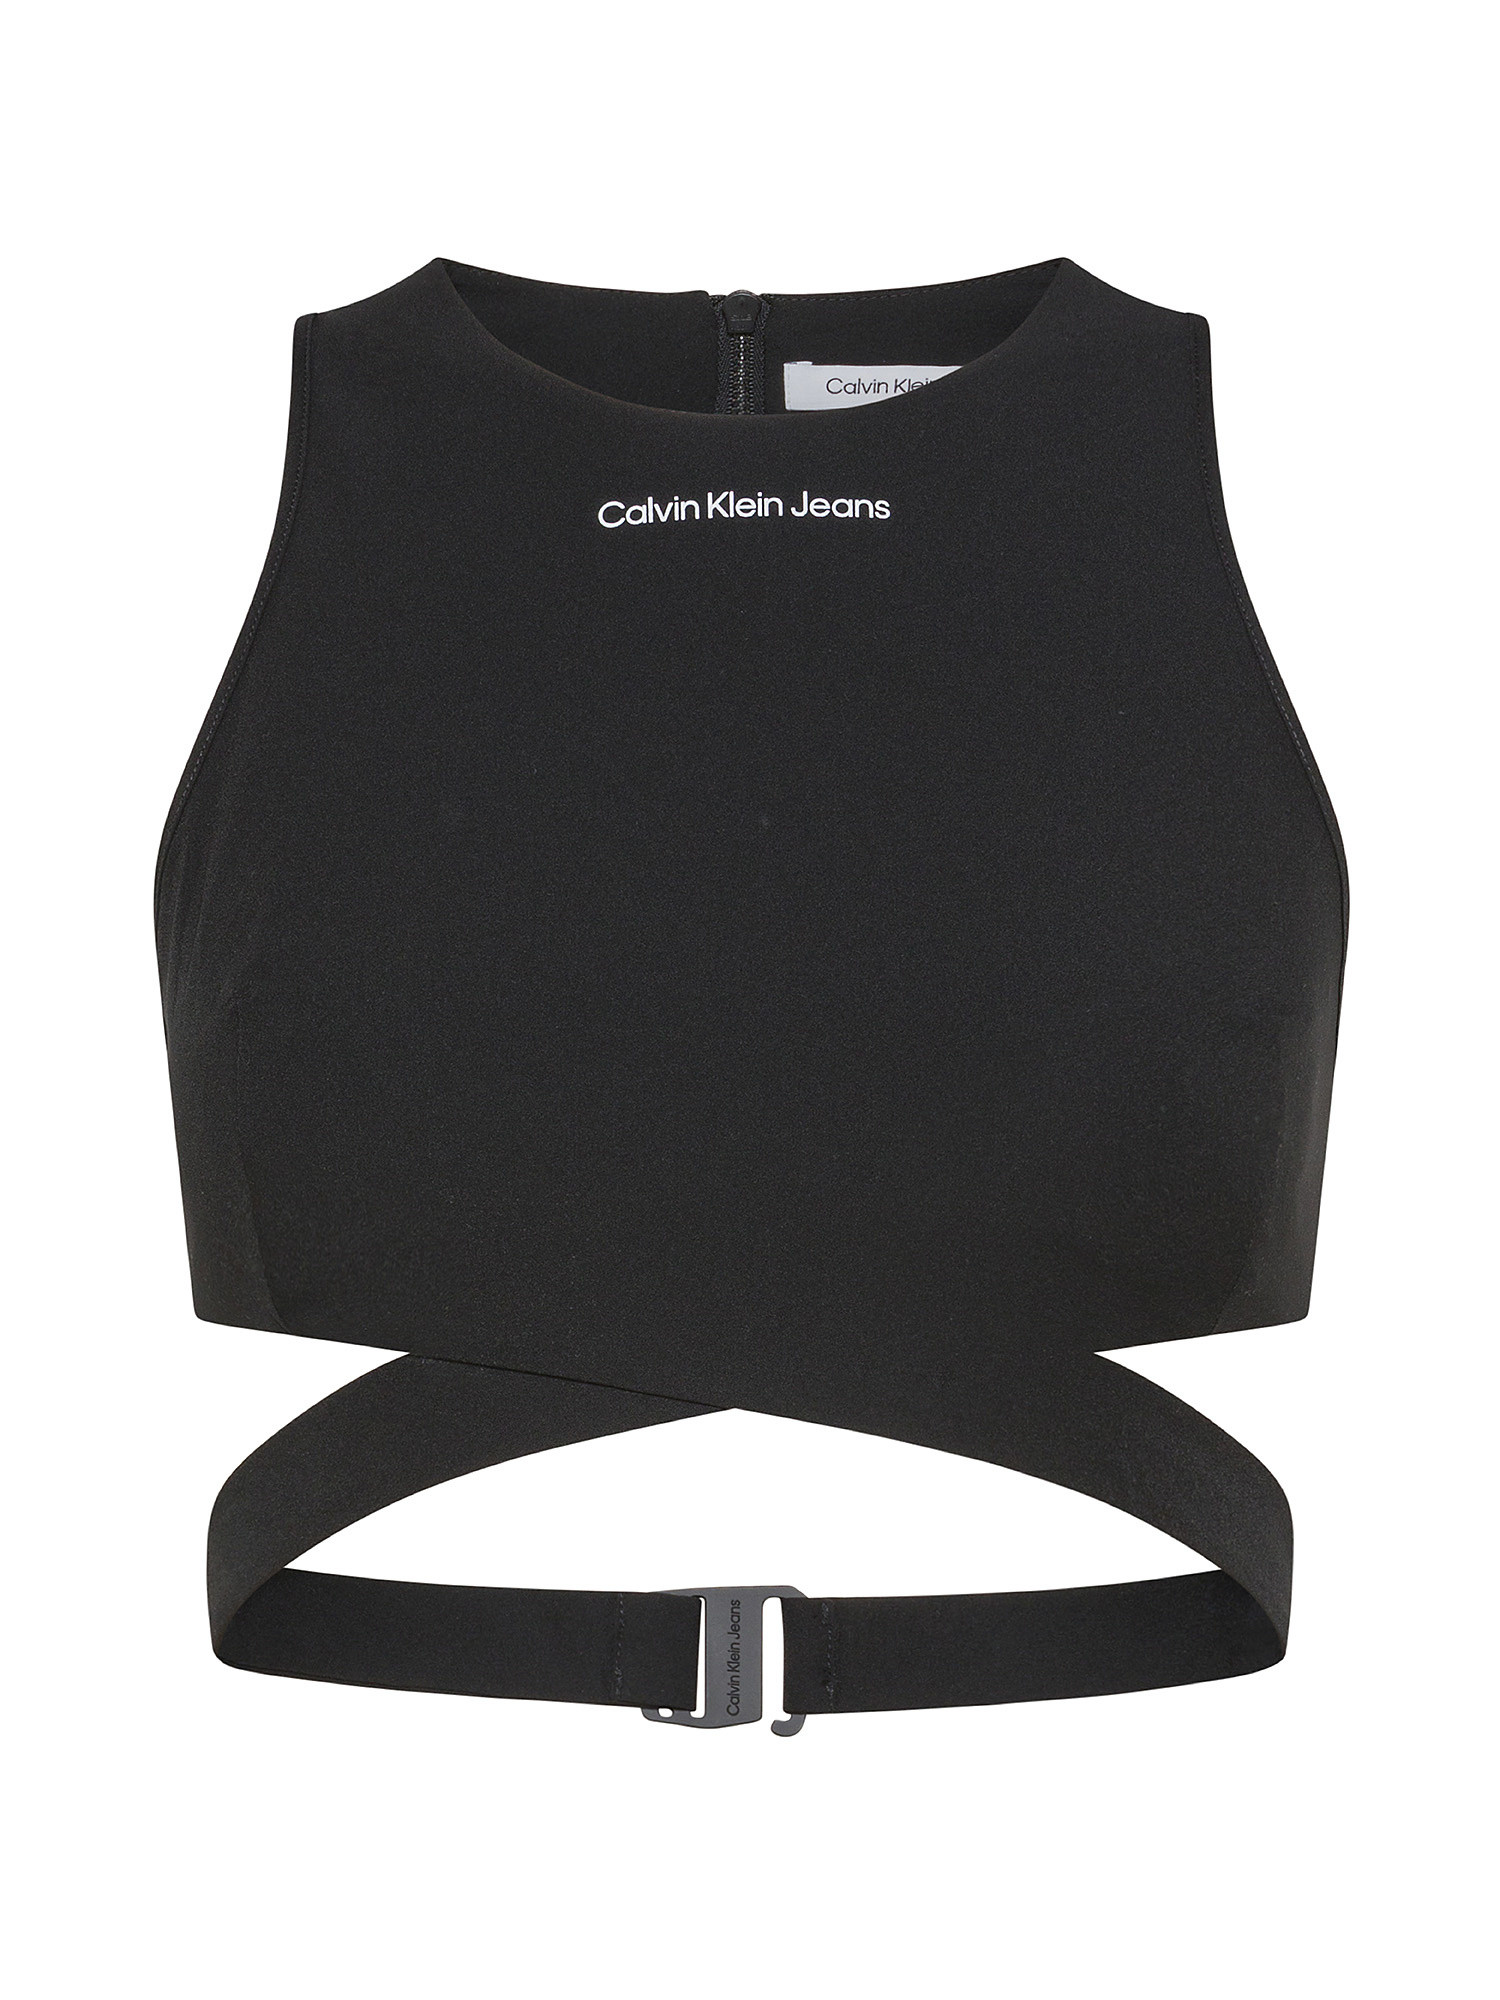 Calvin Klein Jeans - Top cut out, Black, large image number 0